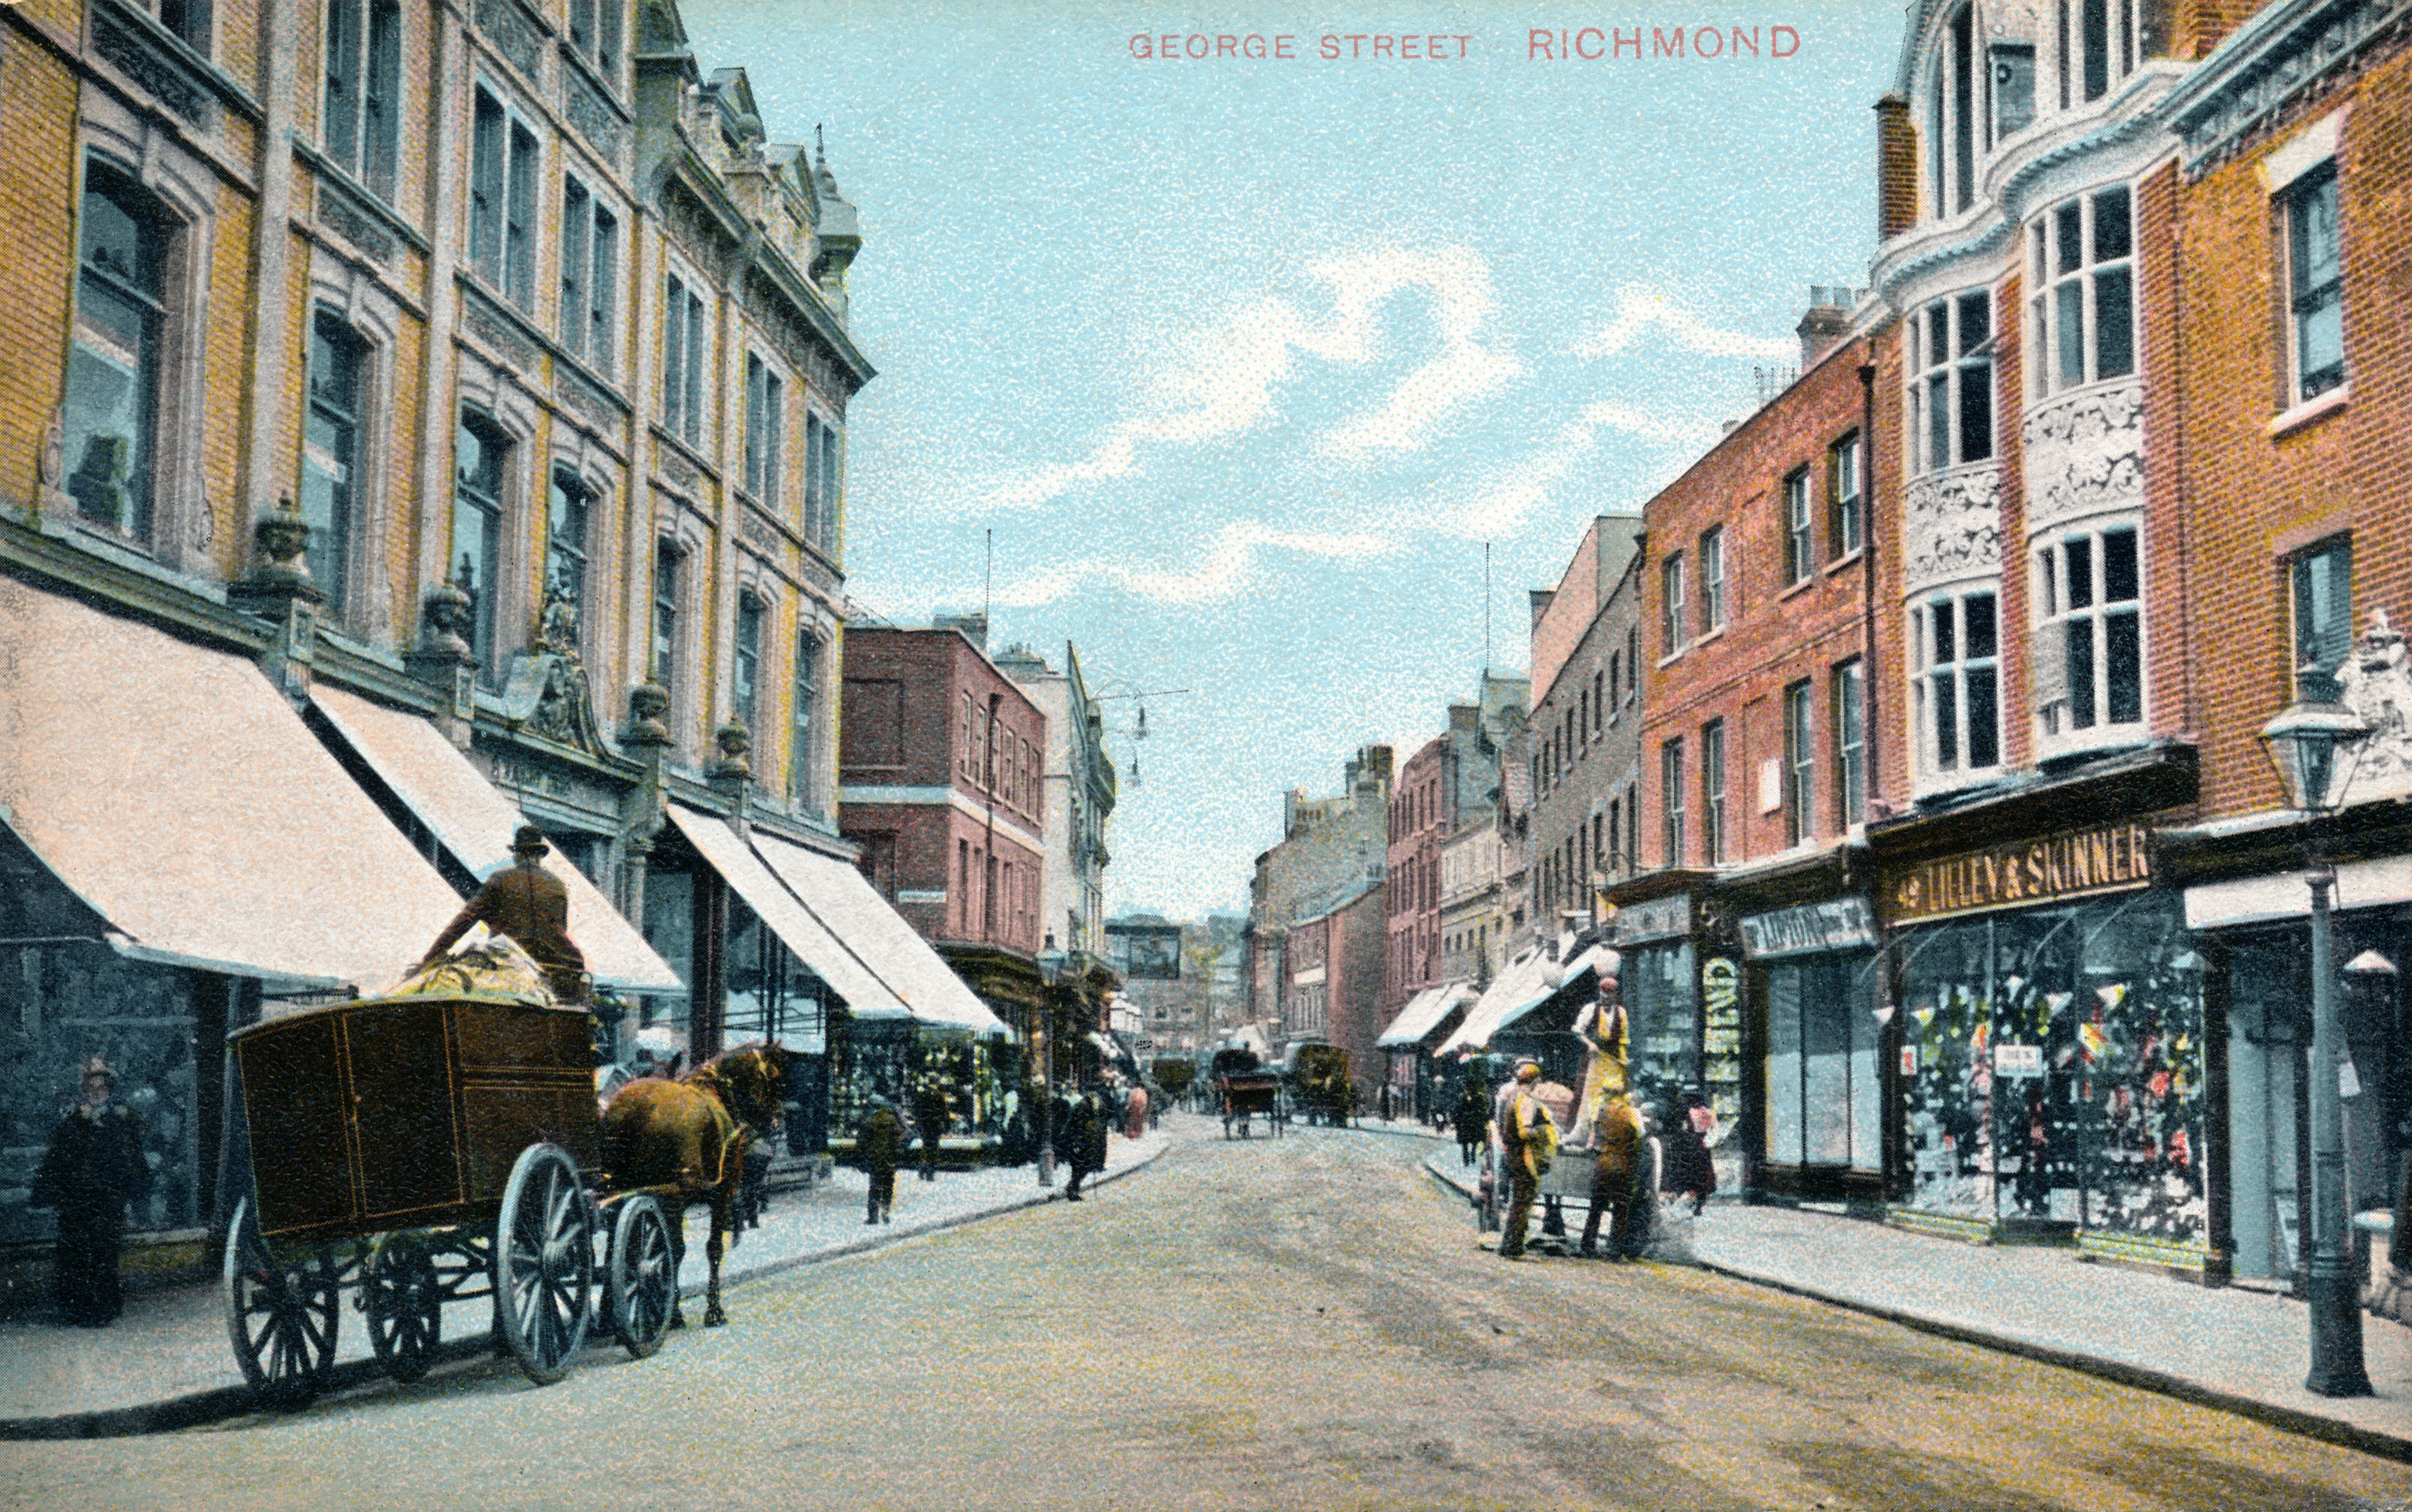 Richmond George Street away from station,street-townscape